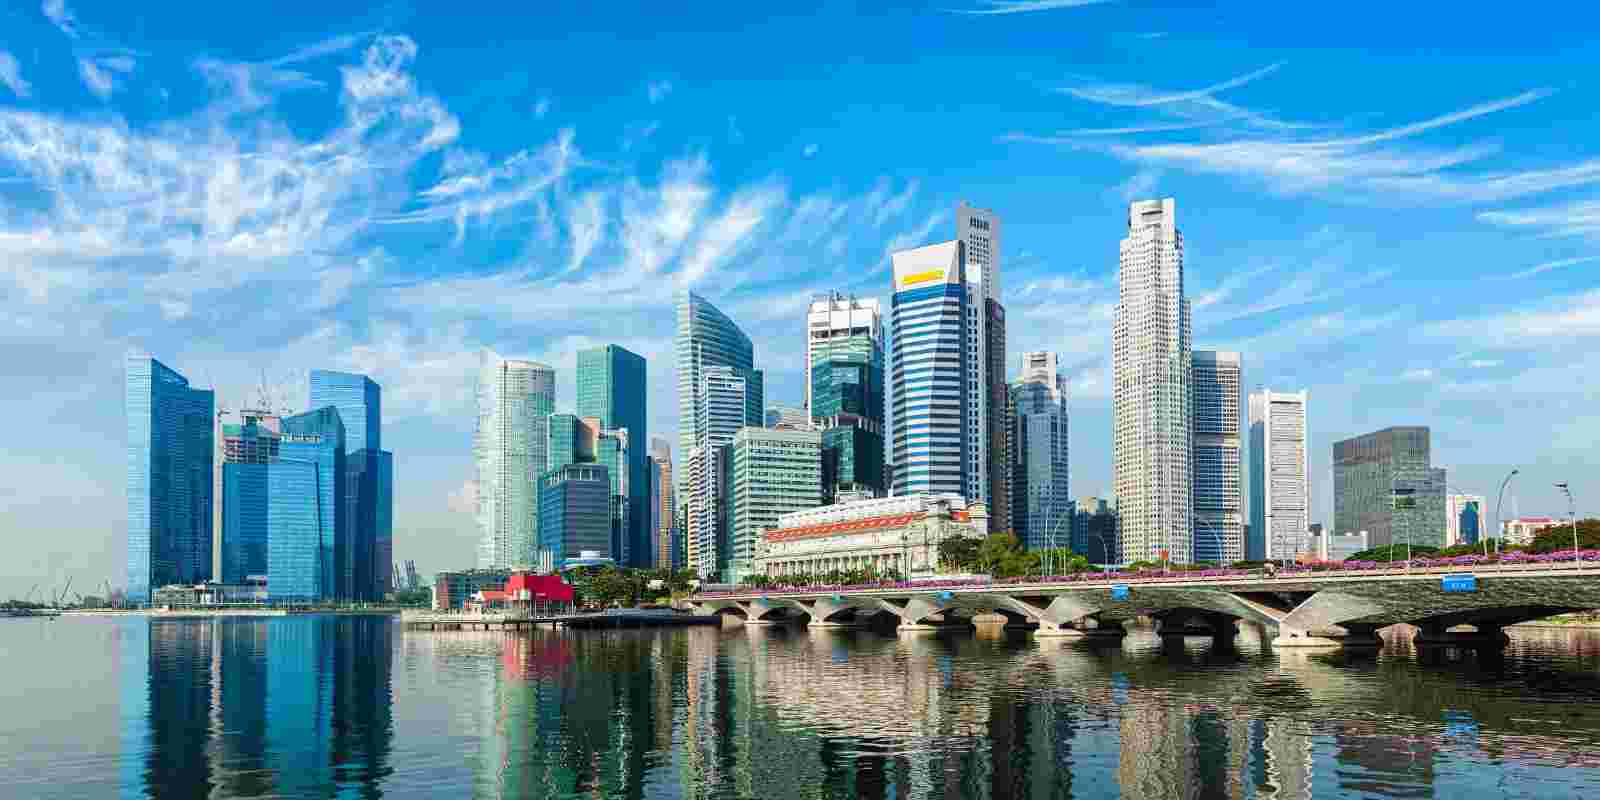 <h1>Hotels near Beauty World Centre in Singapore</h1>